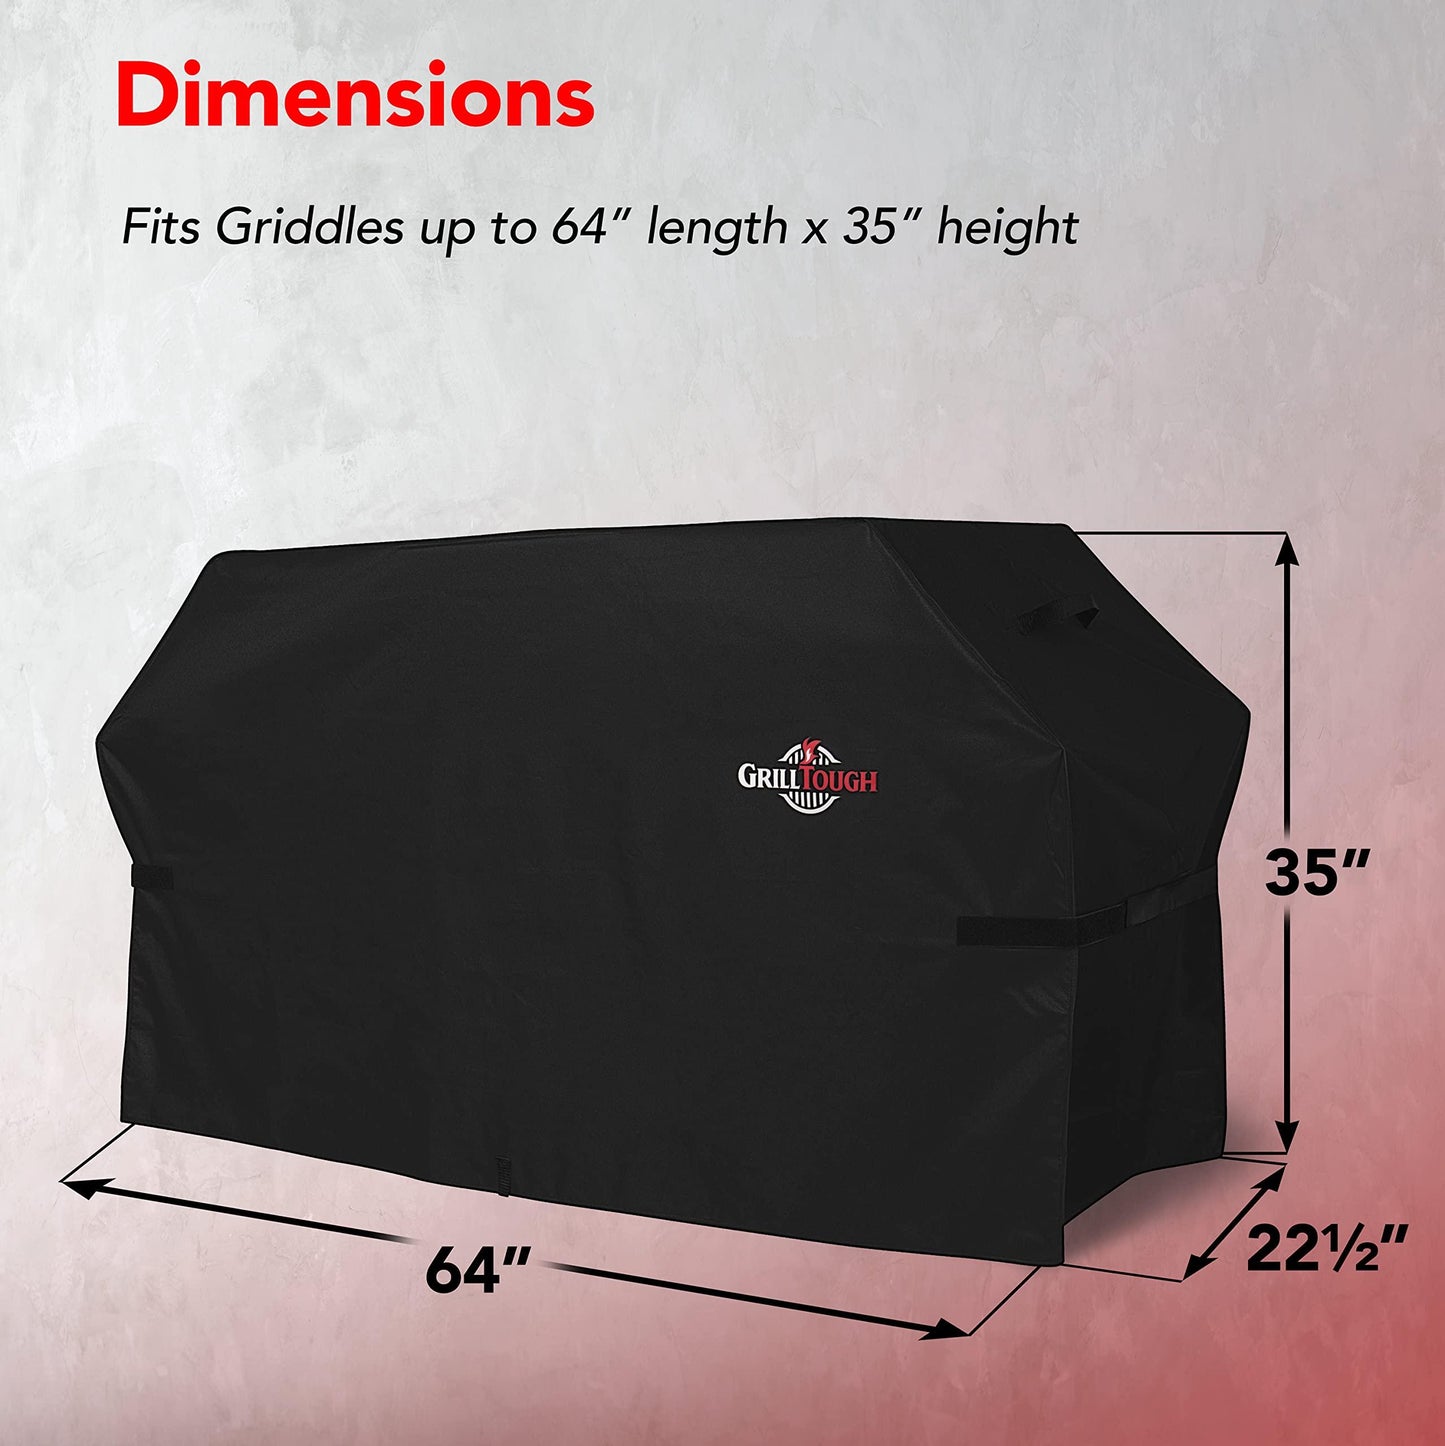 GrillTough Heavy Duty Griddle Cover for Outdoor Griddle, Fits 36 Inch Griddle – Waterproof, Weather Resistant, UV & Fade Resistant with Adjustable Straps – BBQ Cover for Flat Grill, Black - CookCave